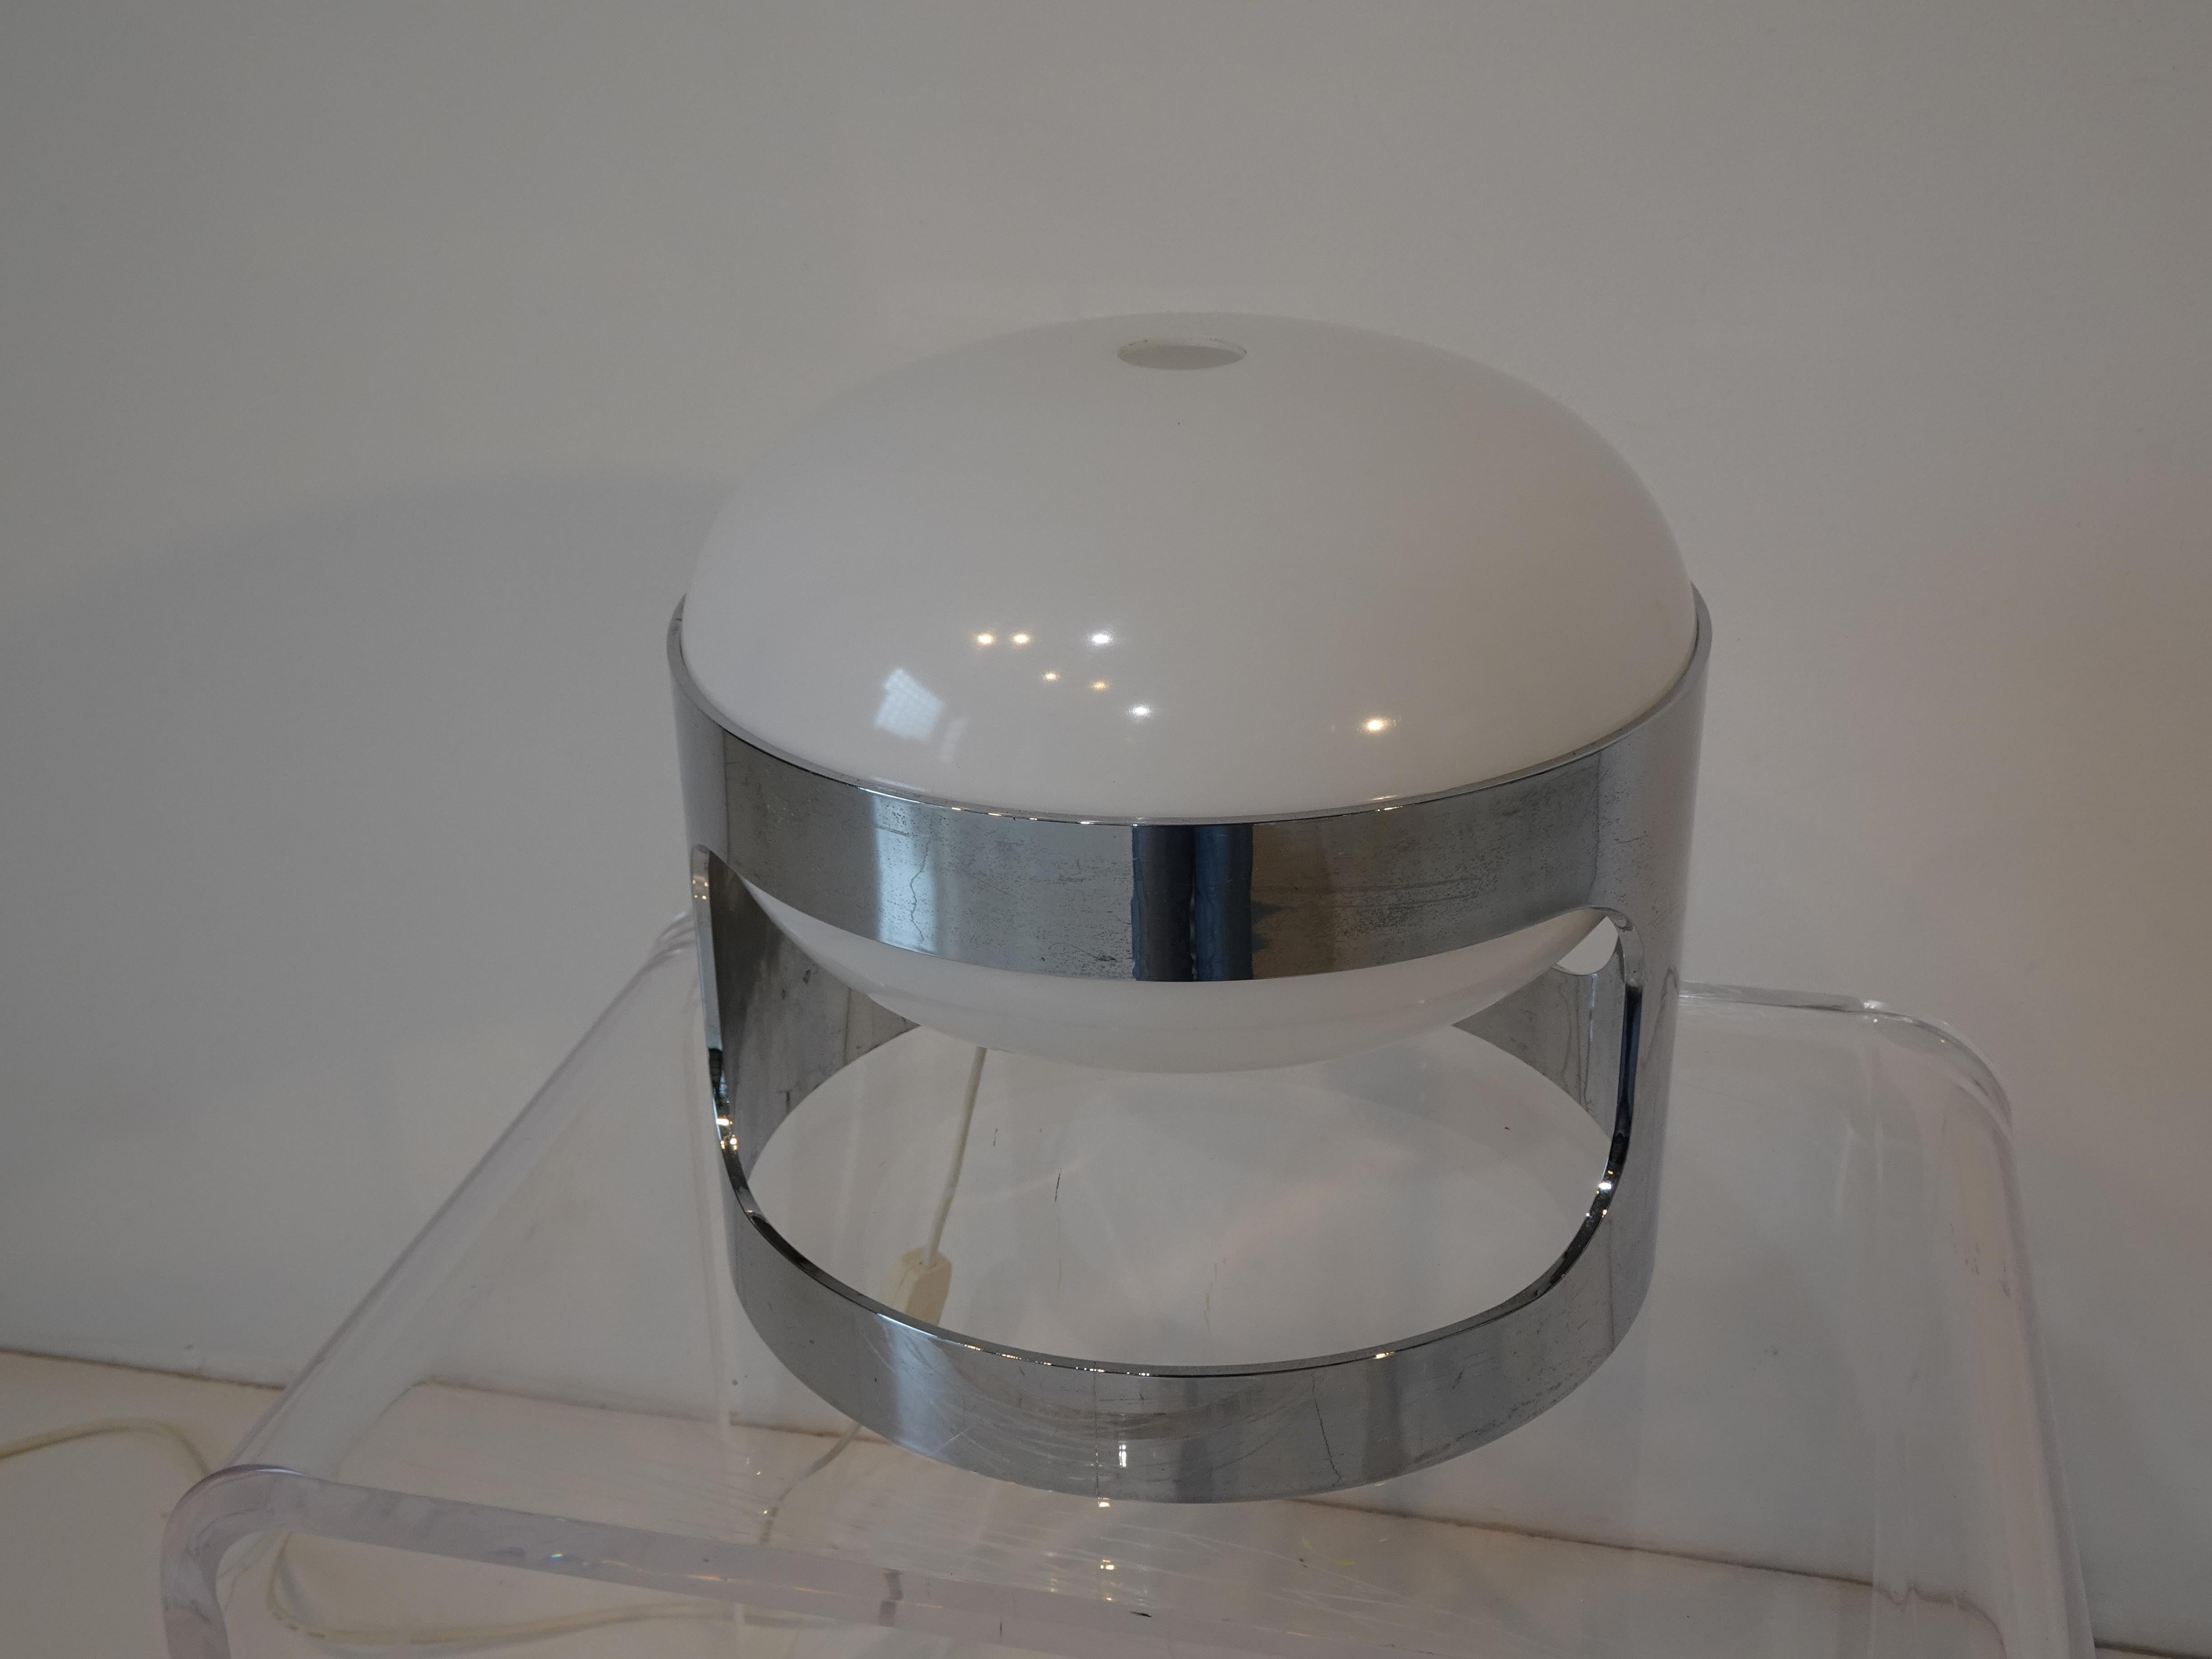 A vintage plastic formed table lamp with chromed holder, split domed shade and in line switch by designer Joe Colombo. Produced by Kartell in the 1970's the KD 27 was one of Colombo's most accessible lamps for the public but being constructed in